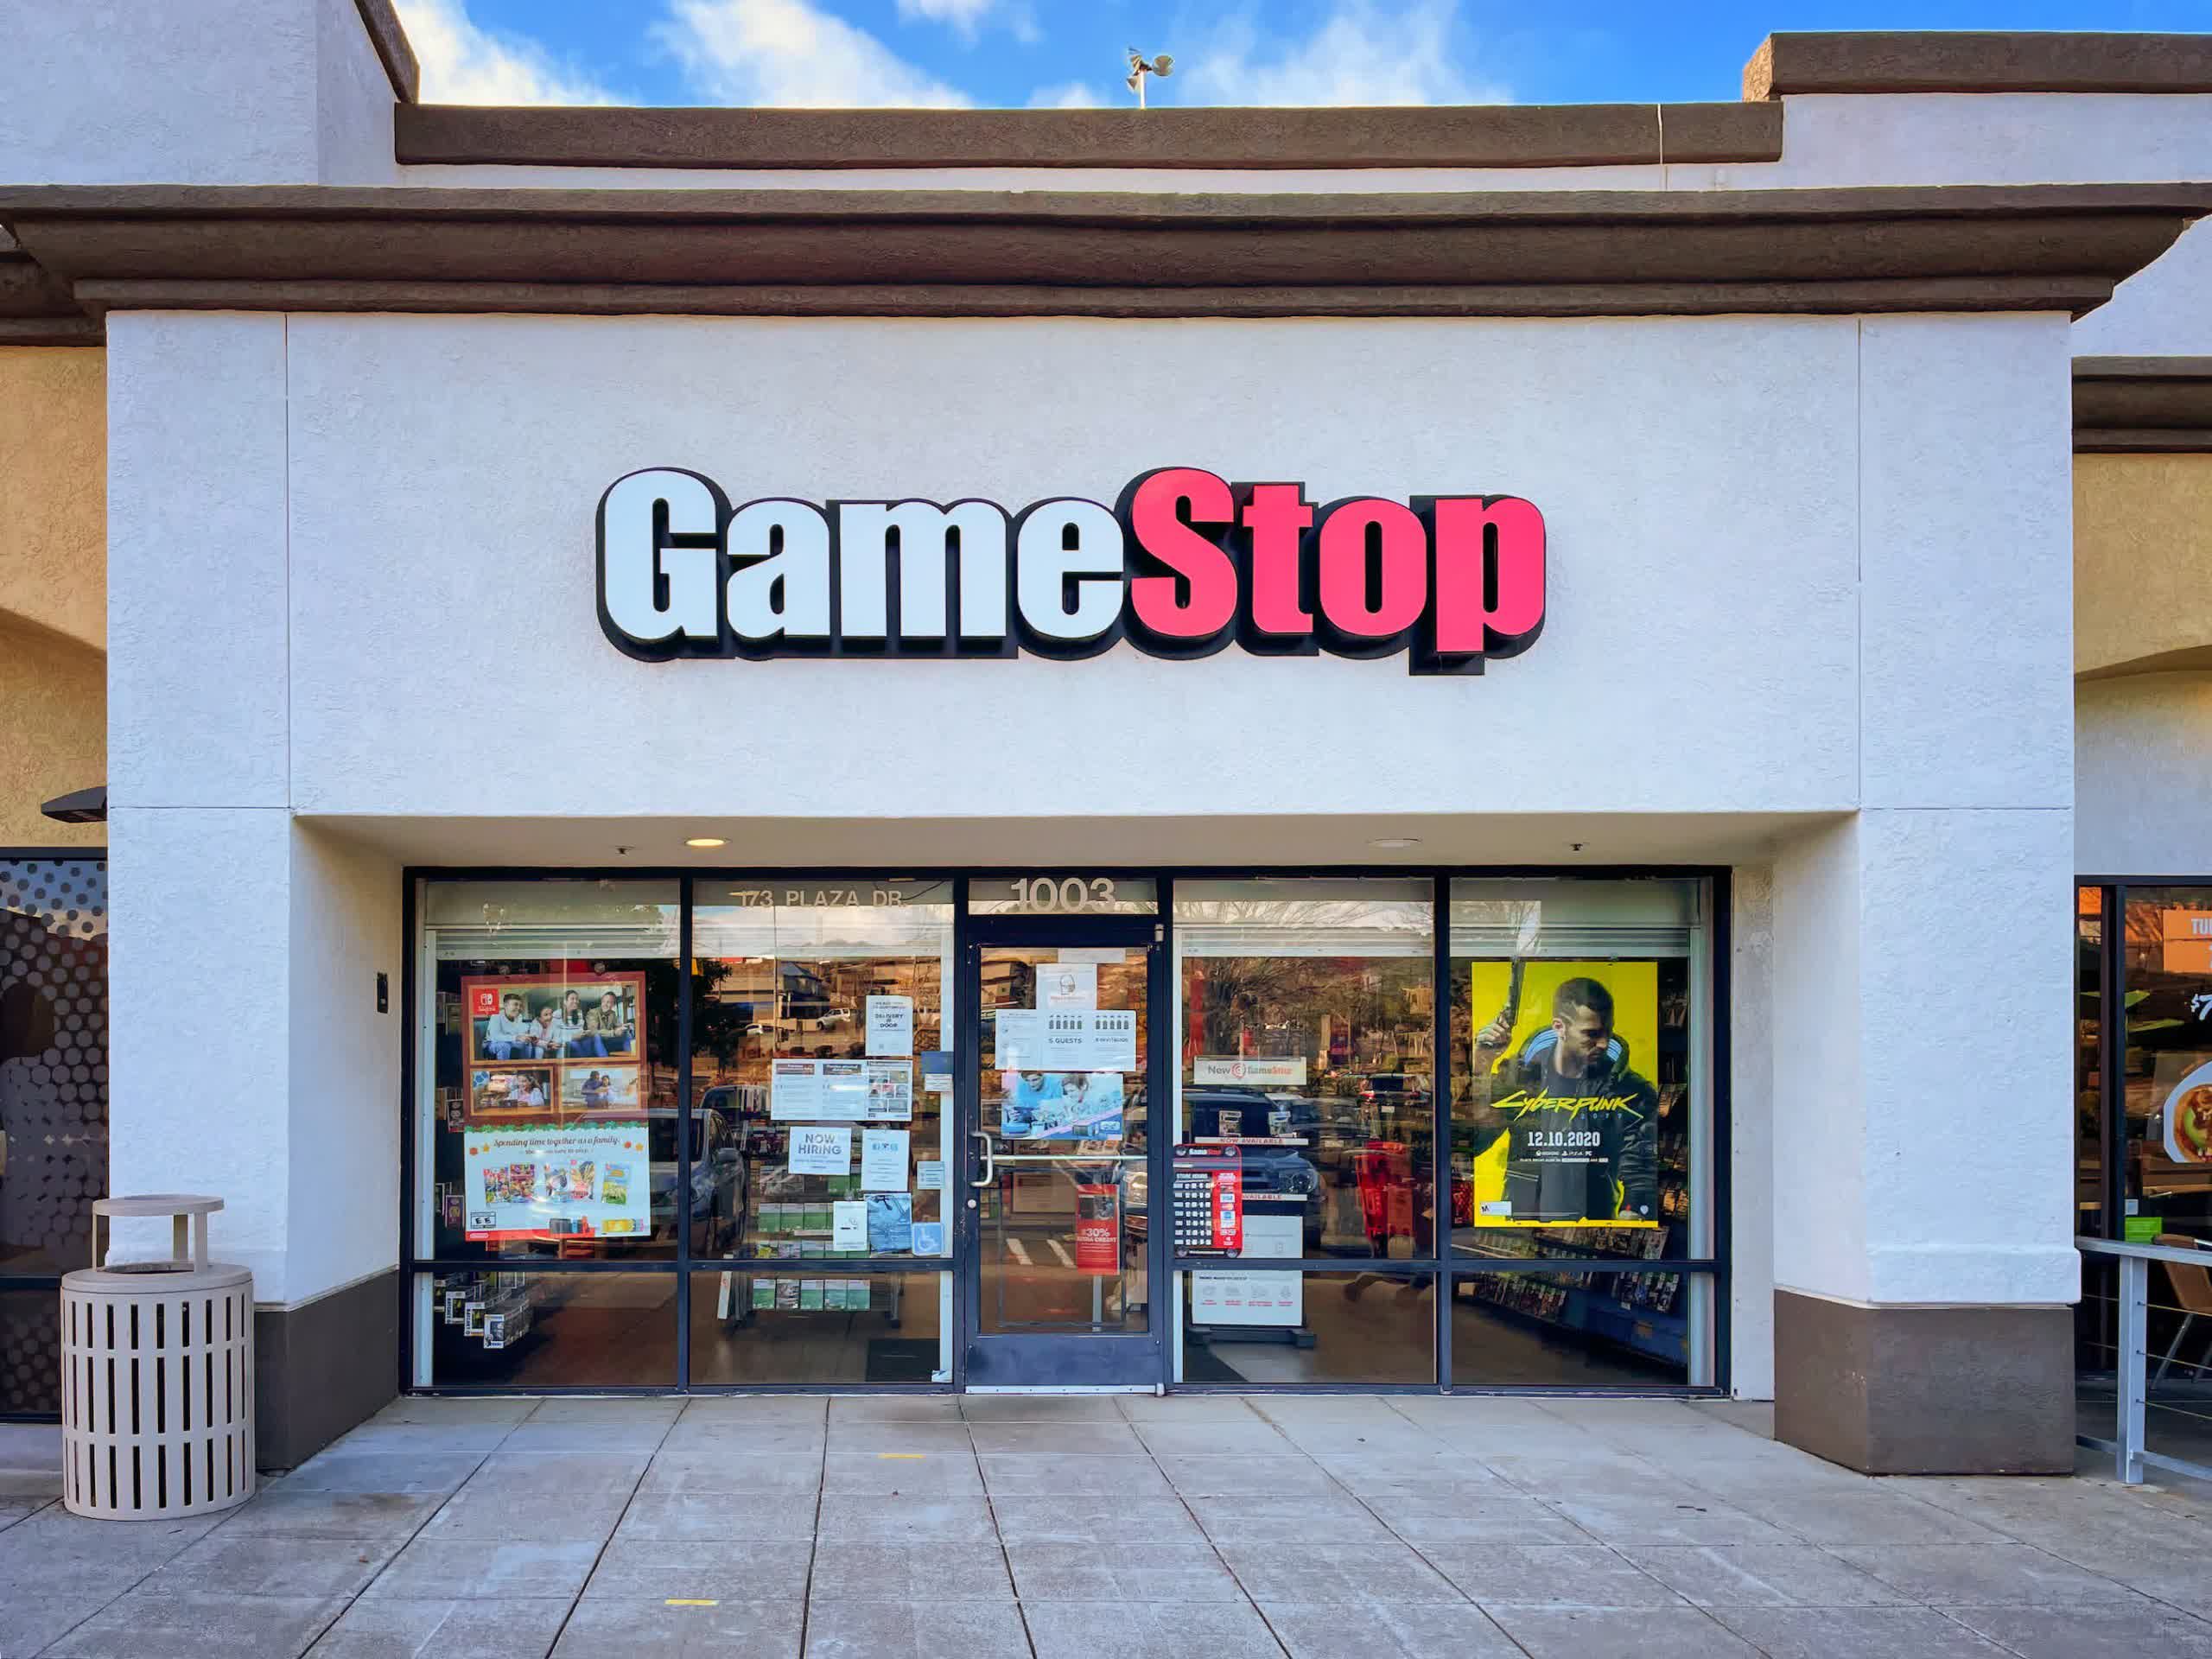 GameStop wiretapped customers without consent, claims lawsuit